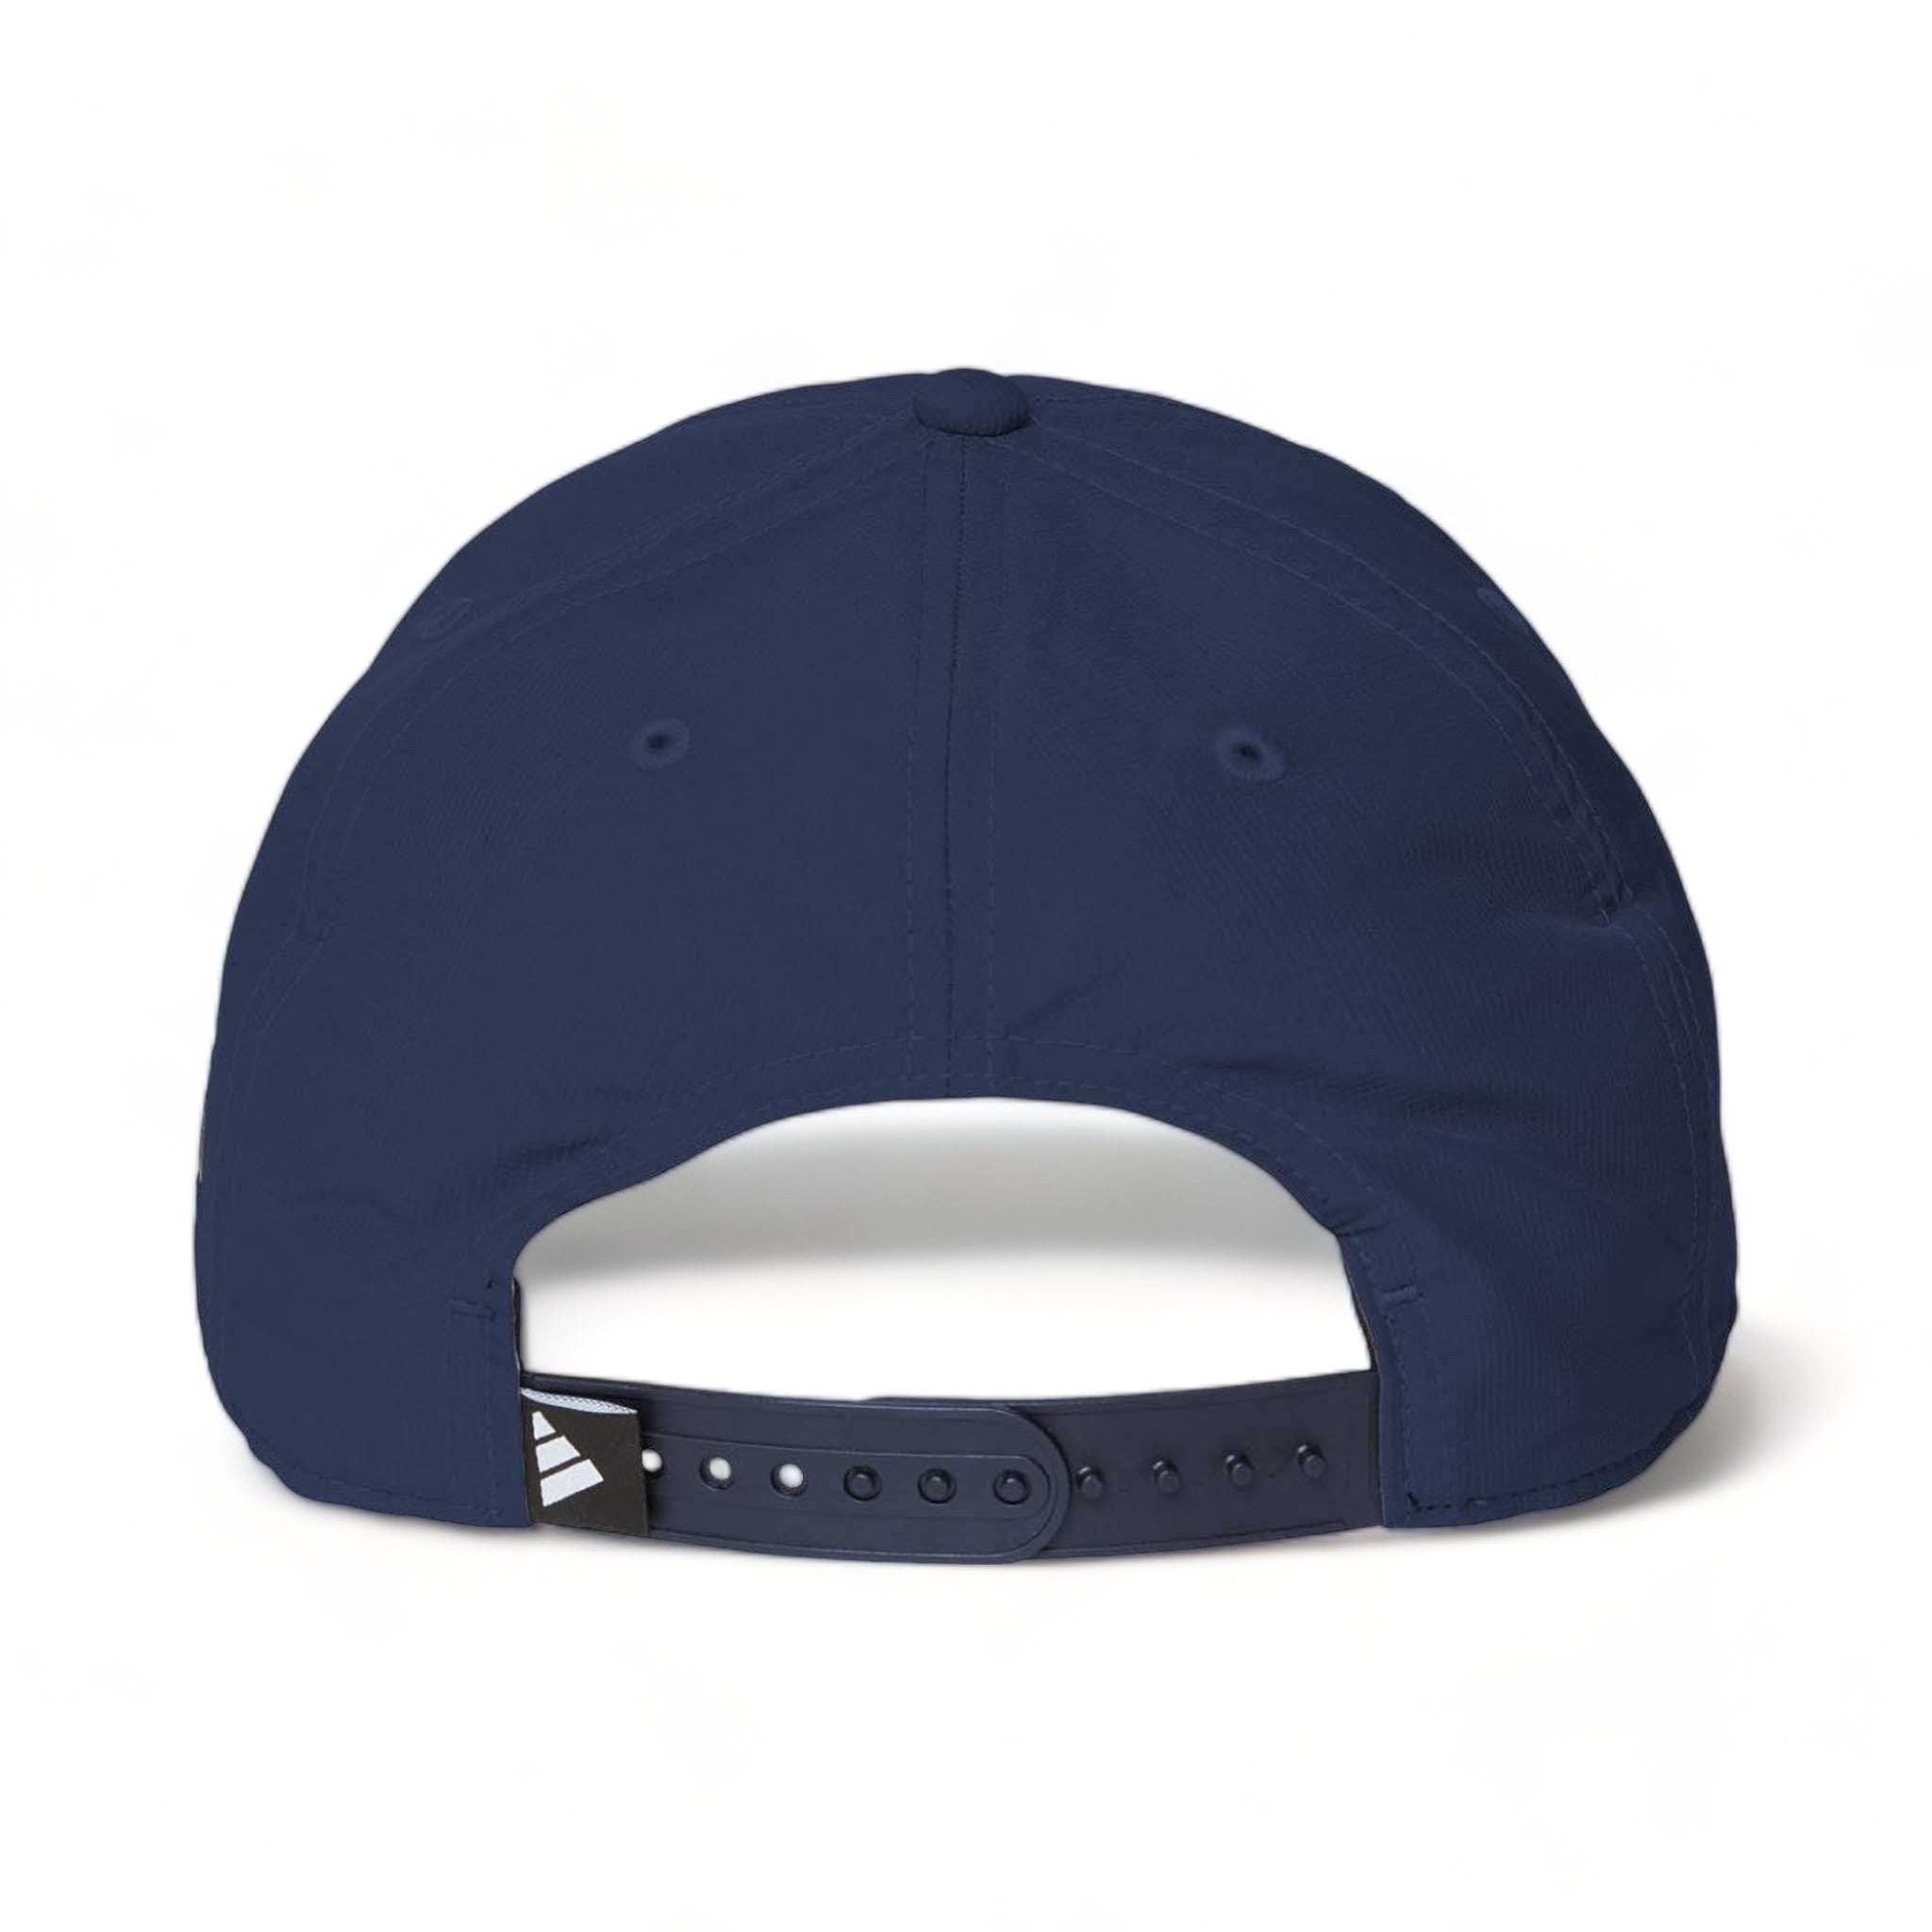 Back view of Adidas A605S custom hat in collegiate navy